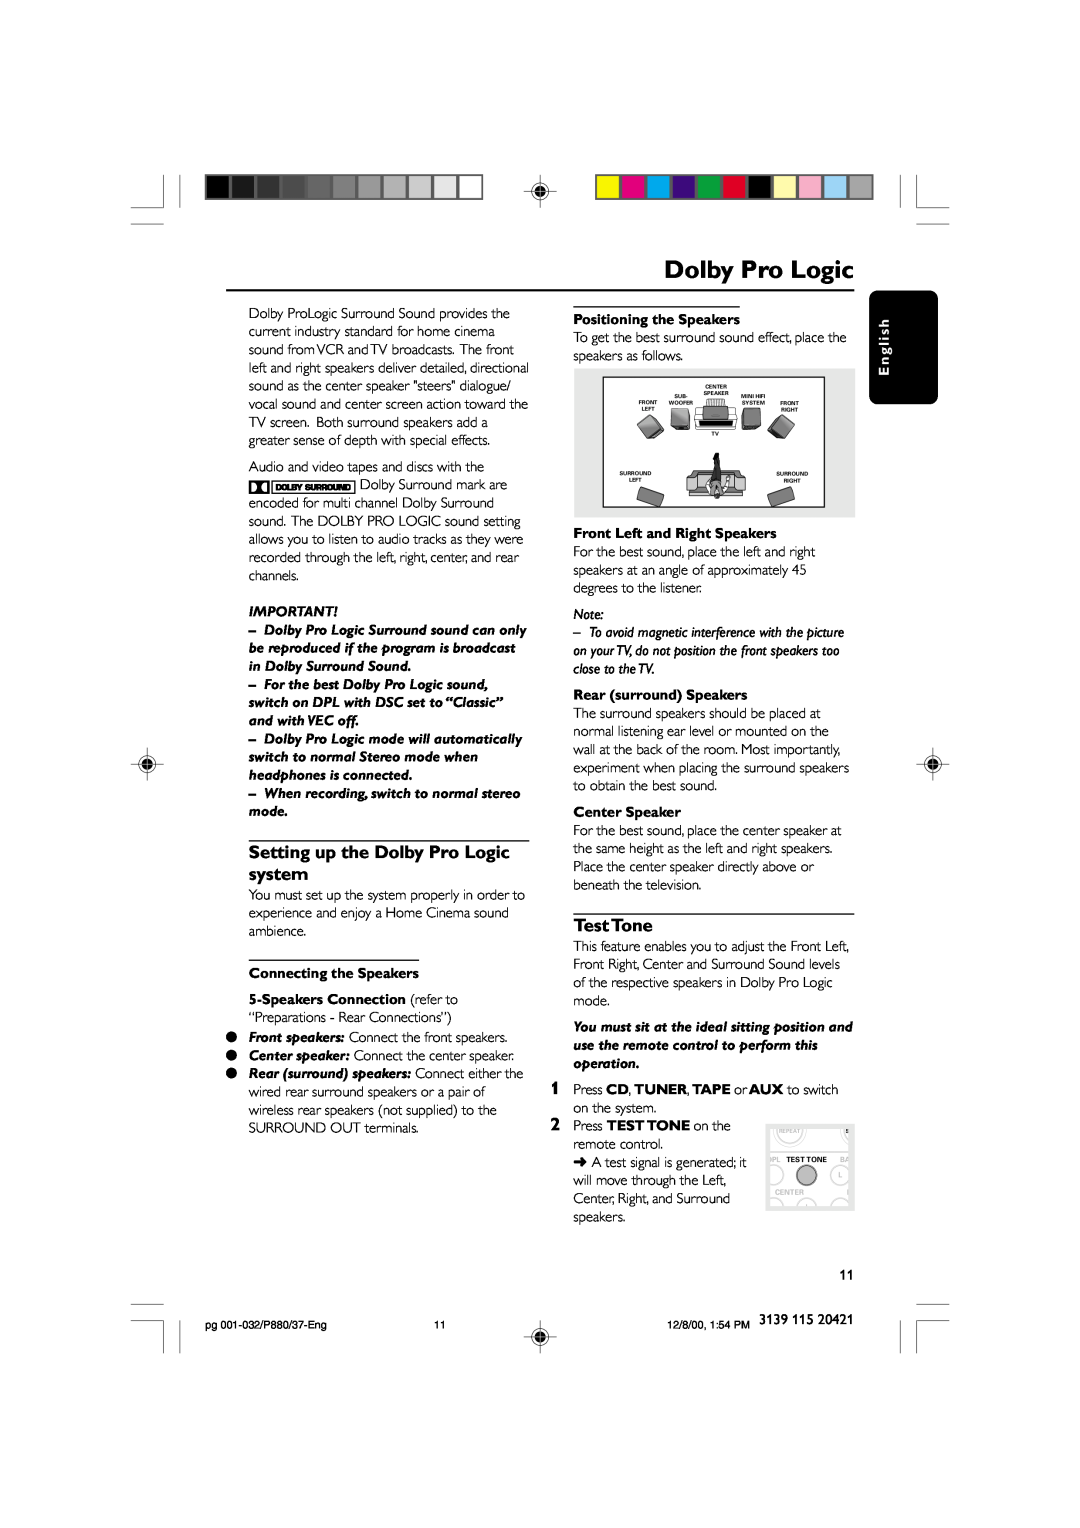 Philips P880 manual For the best Dolby Pro Logic sound, switch on DPL with DSC set to “Classic” and with VEC off 